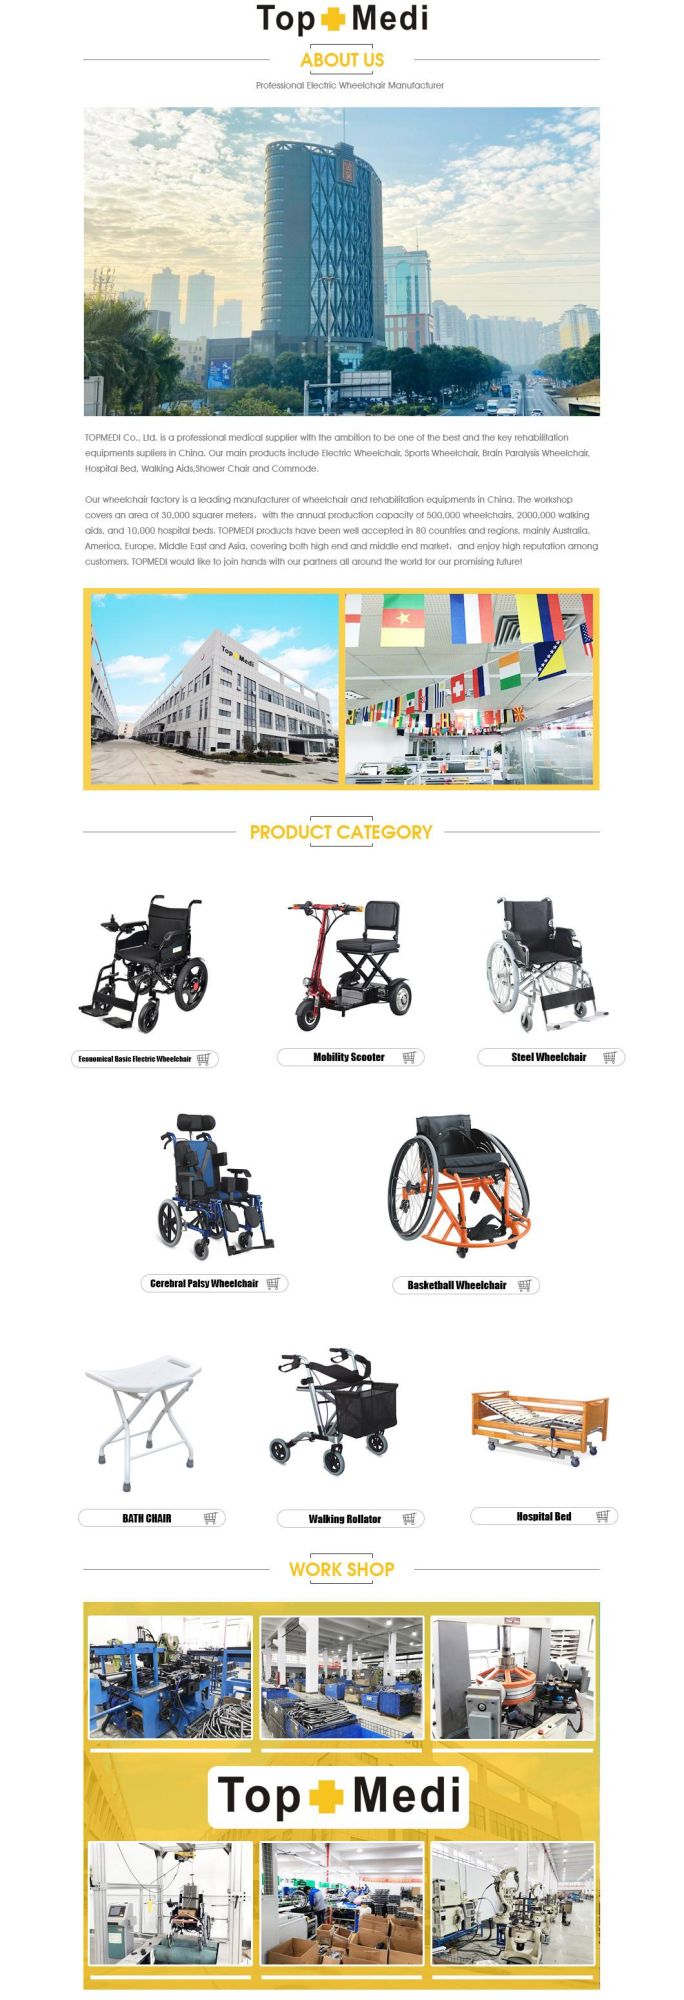 Multifunctional Foldable Patient Transfer with Commode Seat Wheelchair